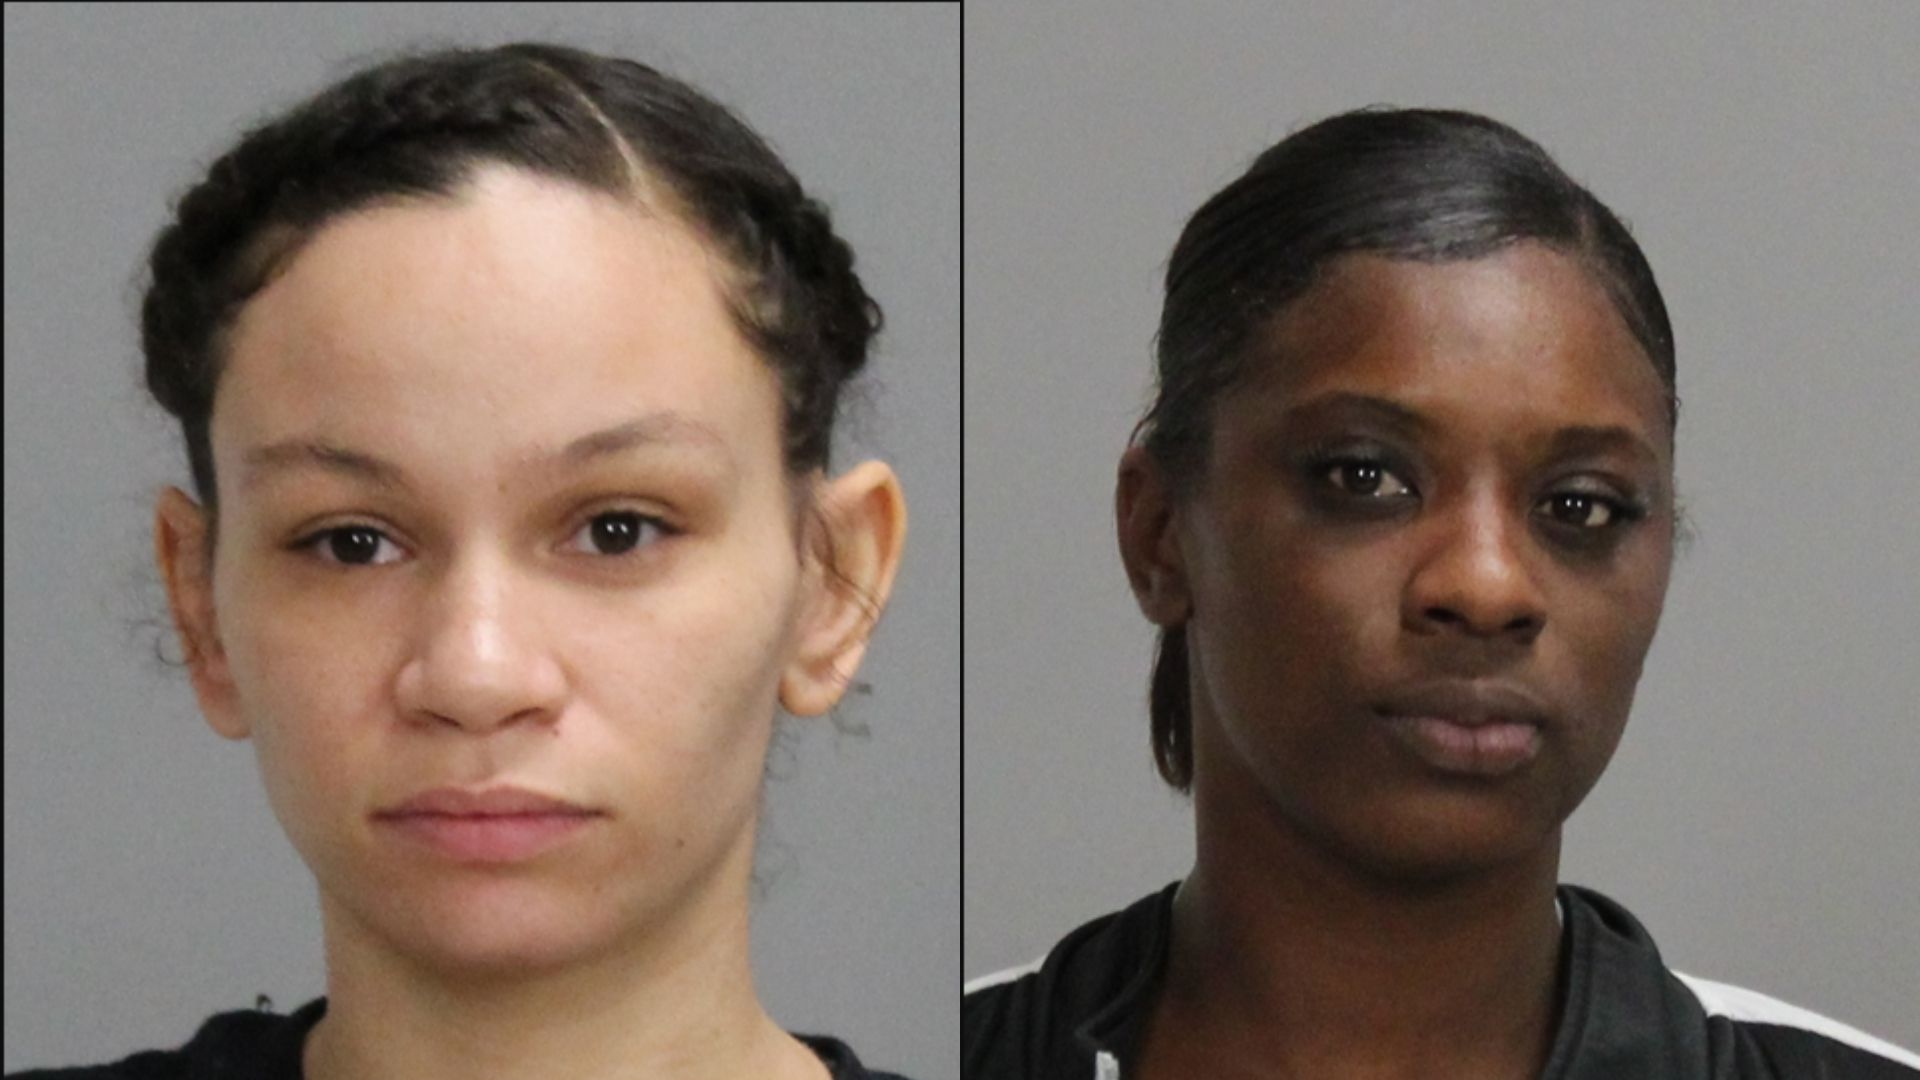 Arrested Women Porn - Area women accused of promoting child porn on Facebook